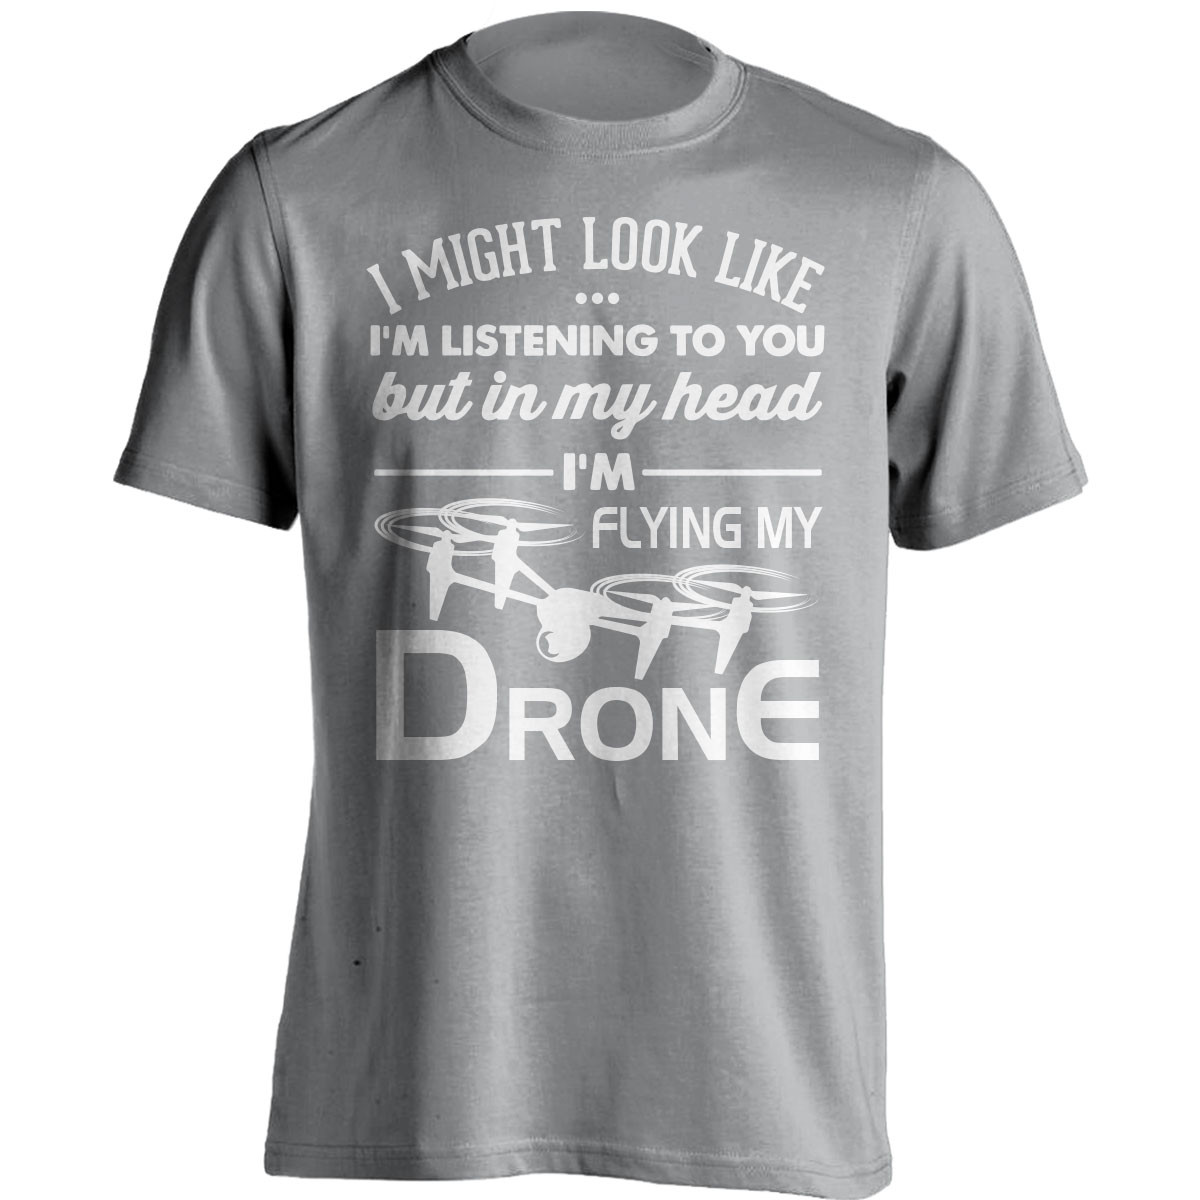 "I Might Look Like I'm Listening To You" Drone Flying T-Shirt